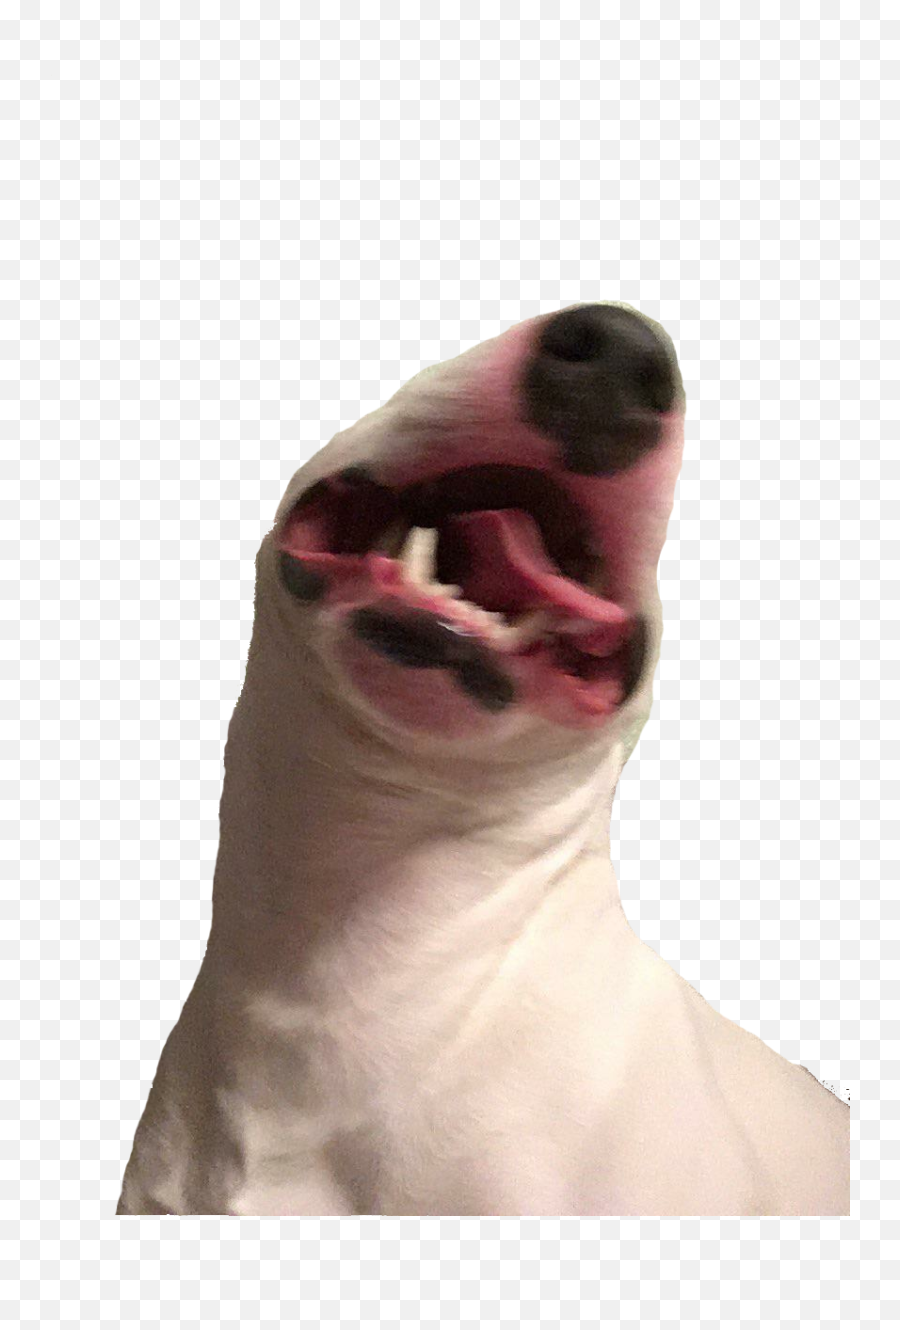 Le Screaming Walter Png Has Arrived - Walter Dog,Screaming Png